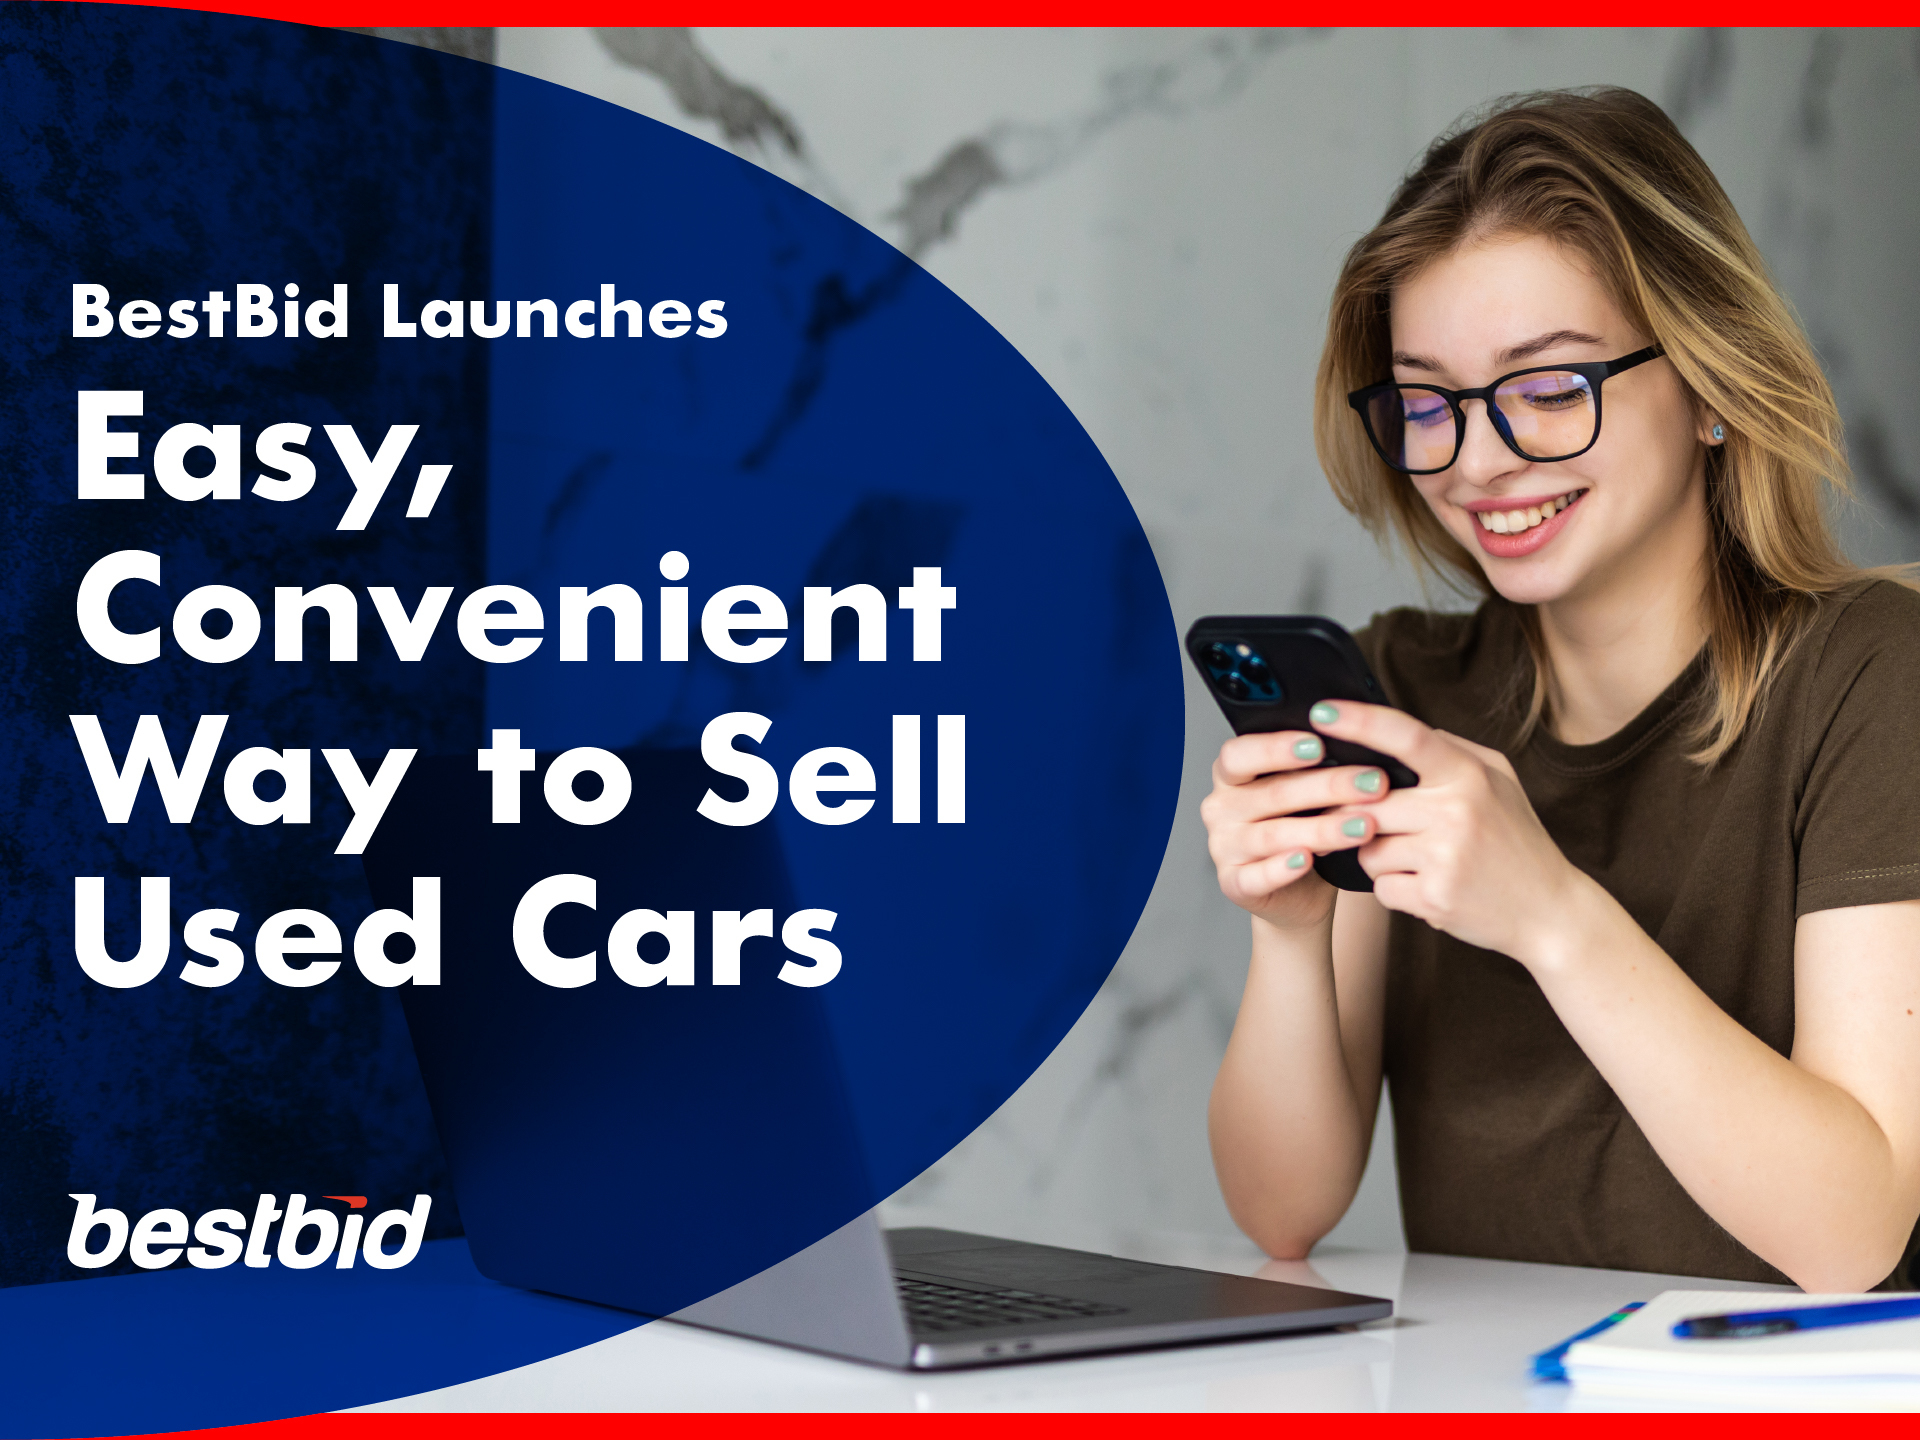 BestBid Auto Group Launches Convenient New Way to Sell Used Cars